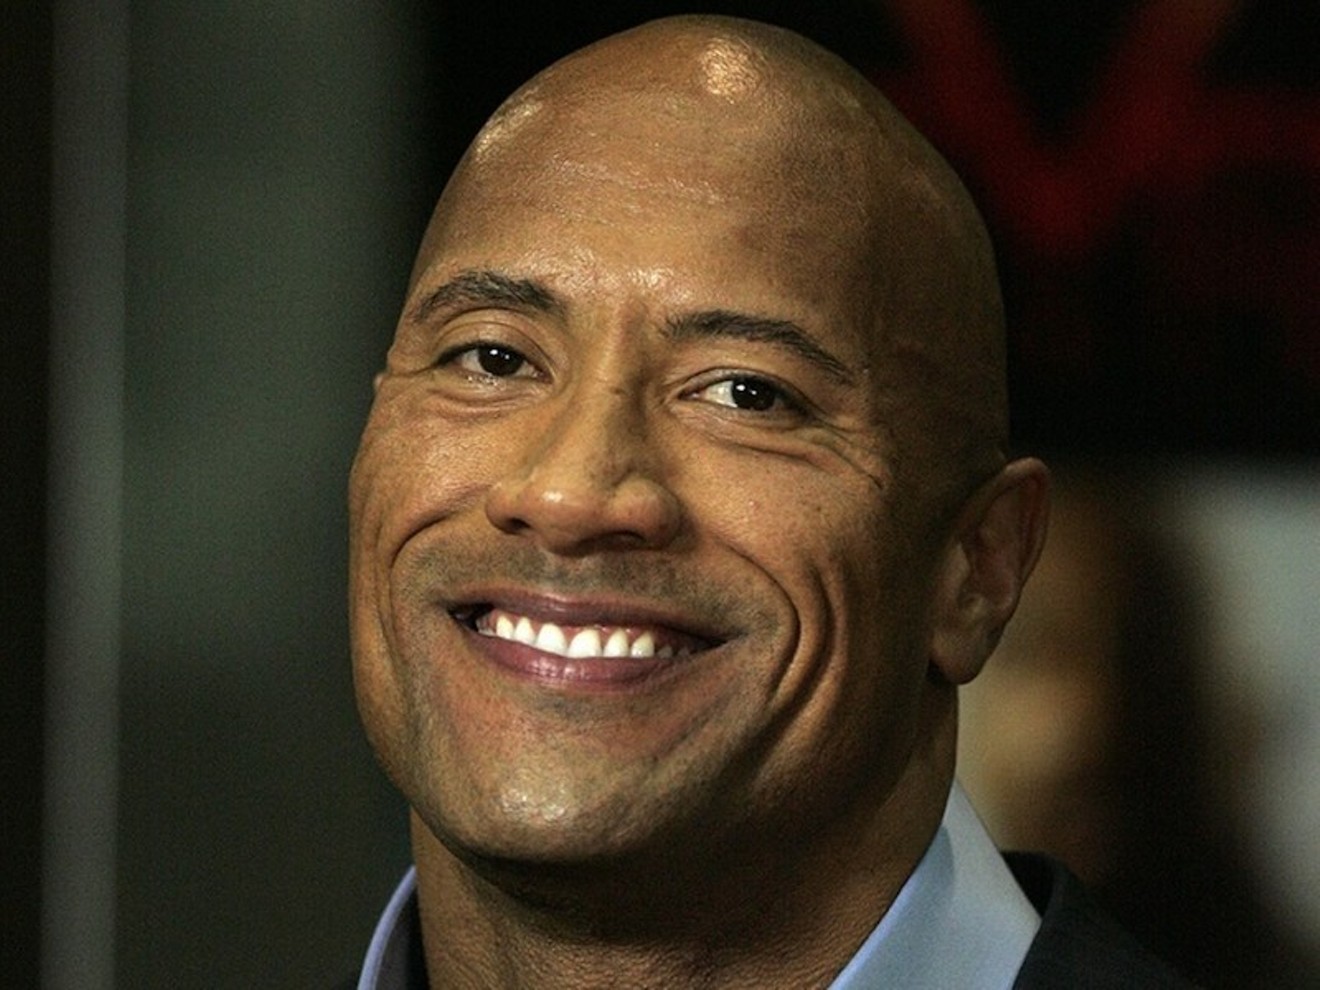 The Rock seems like a natural at anything he does, so why not politics?